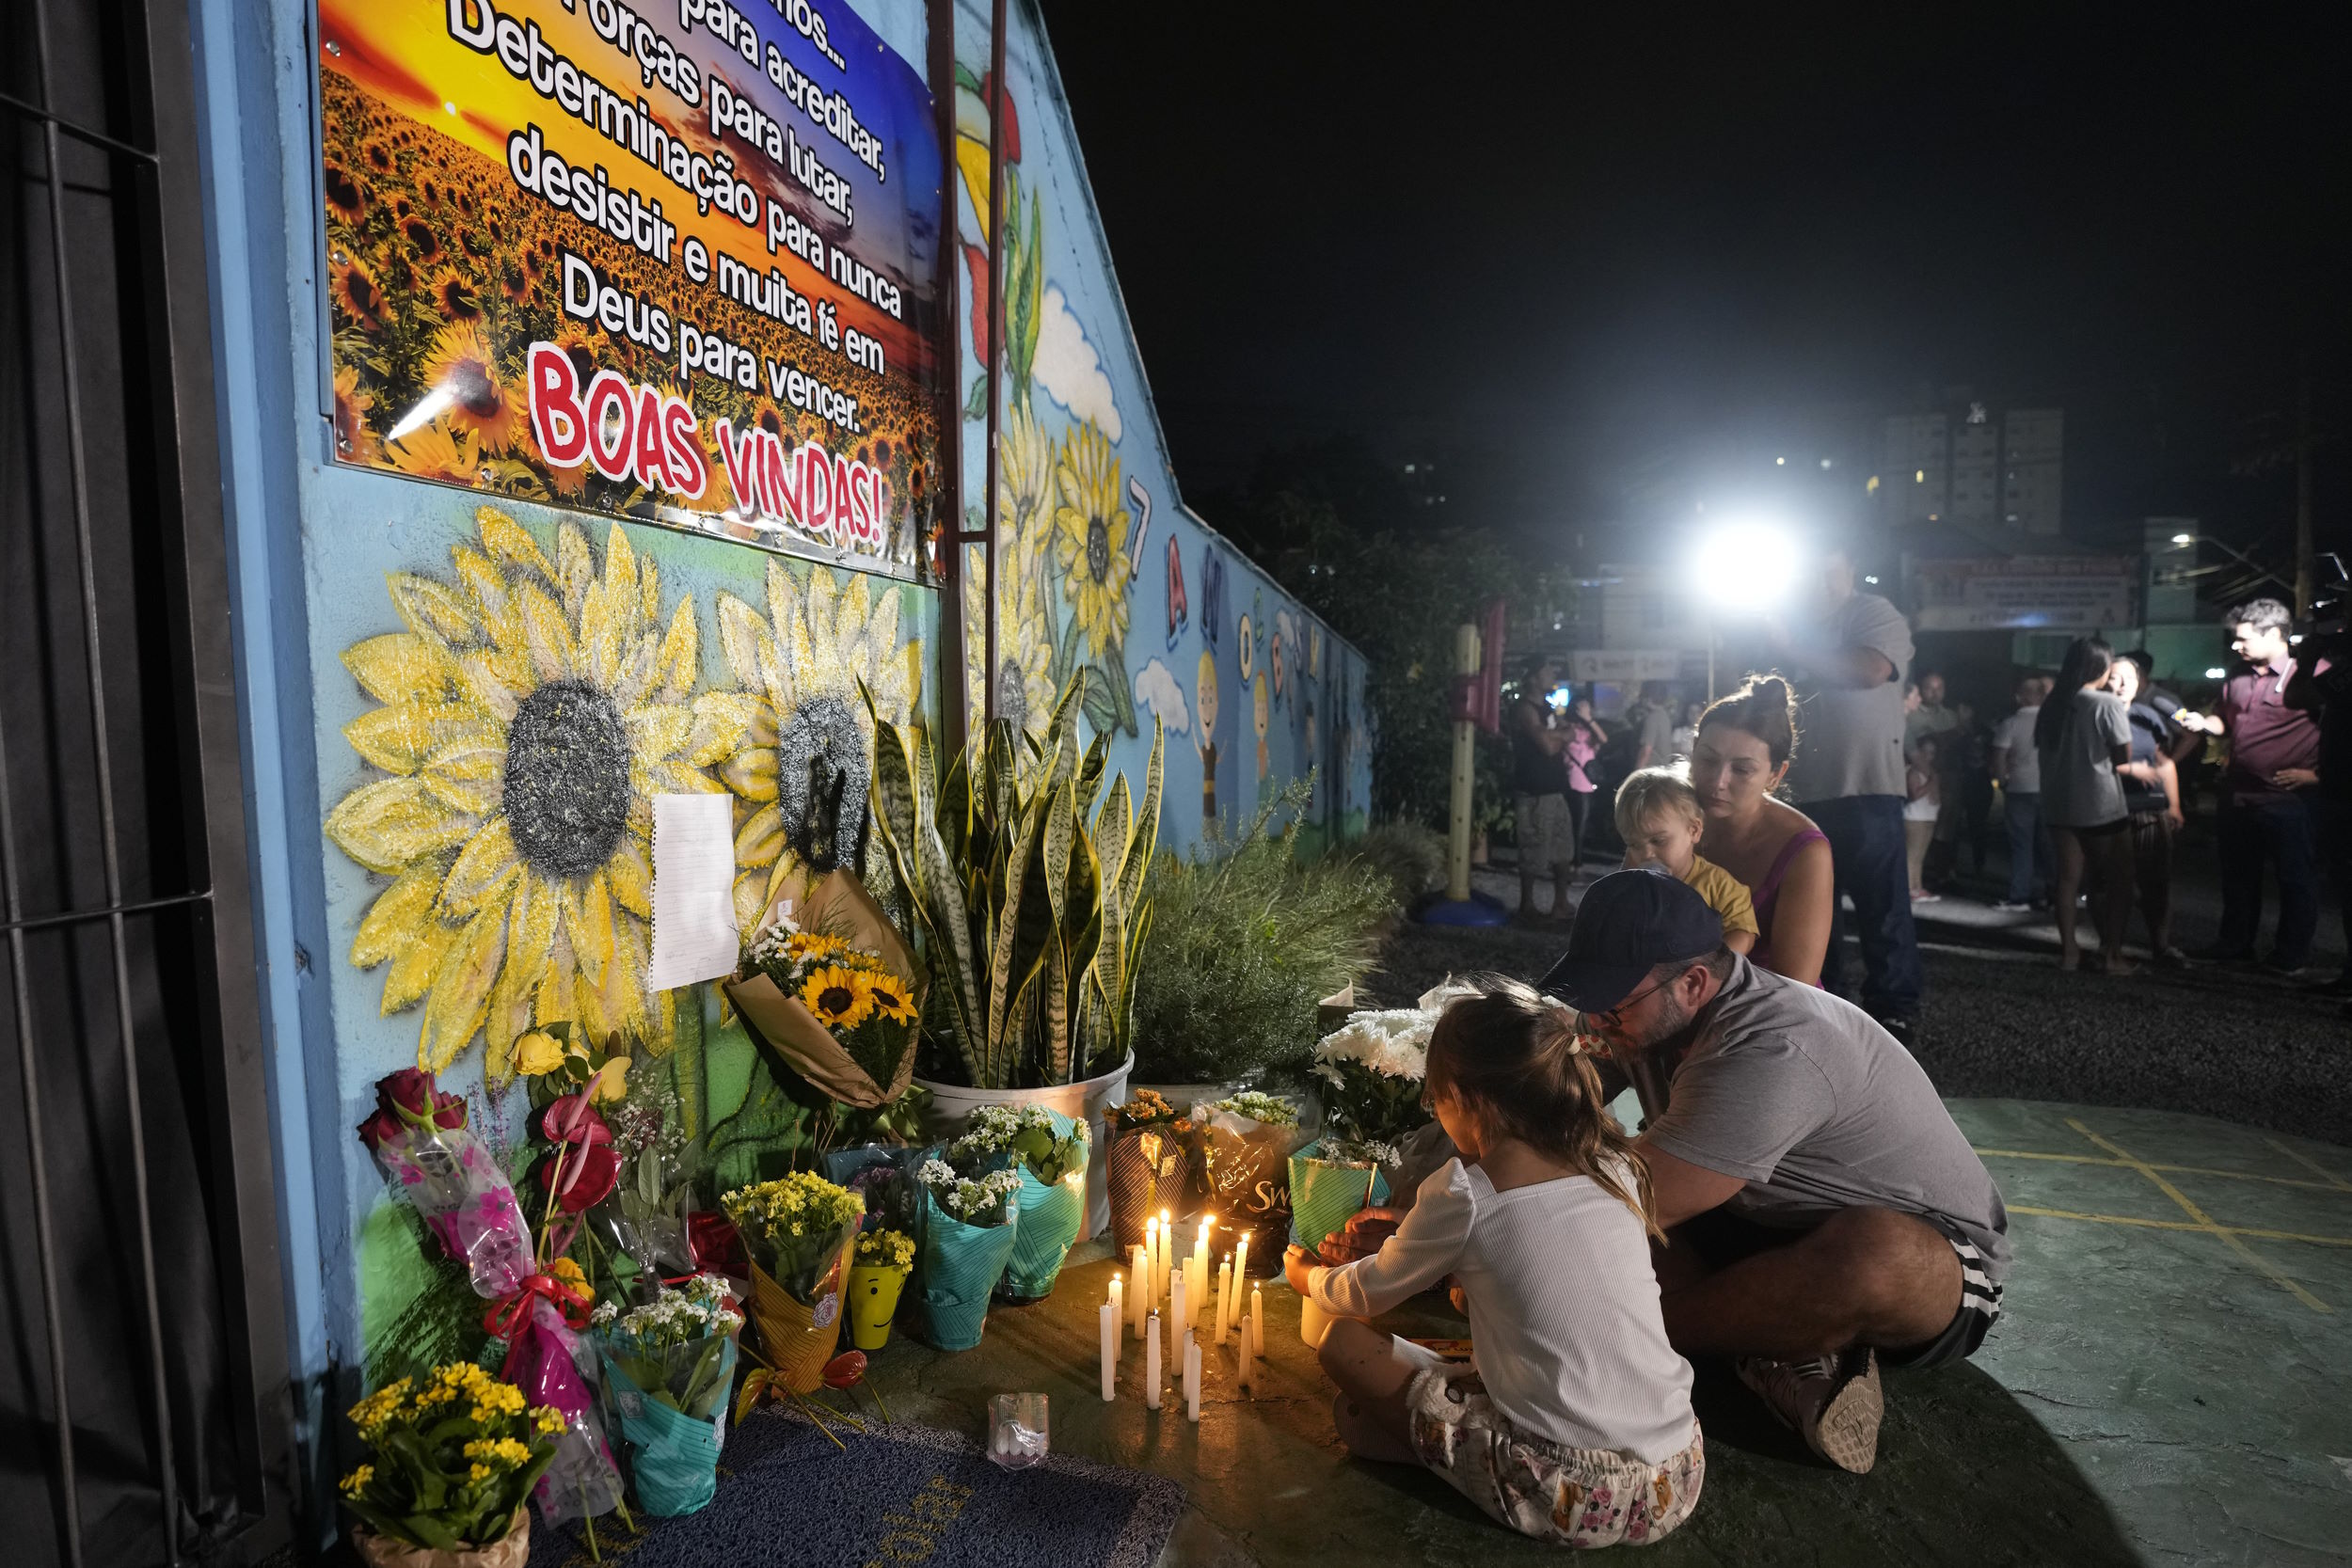 Brazil school violence: People crouch on siewalk laying flowers and lightng candle at a memorial for victims of school violence.